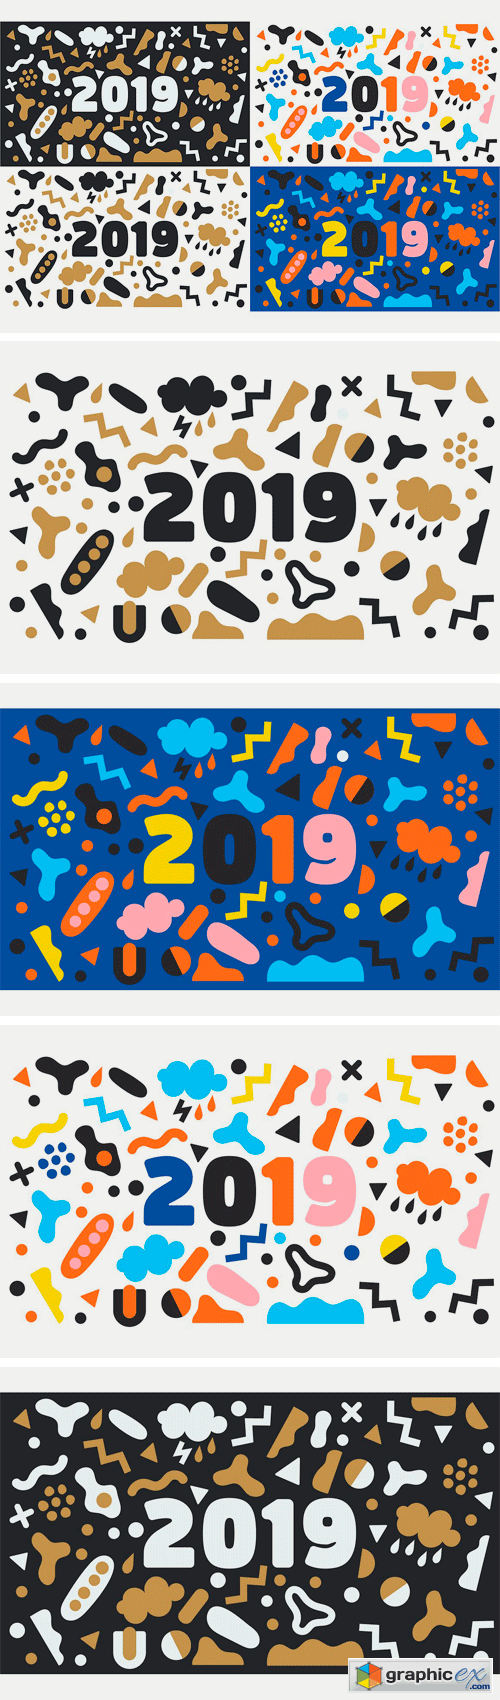 2019 New Year Vector Background Set